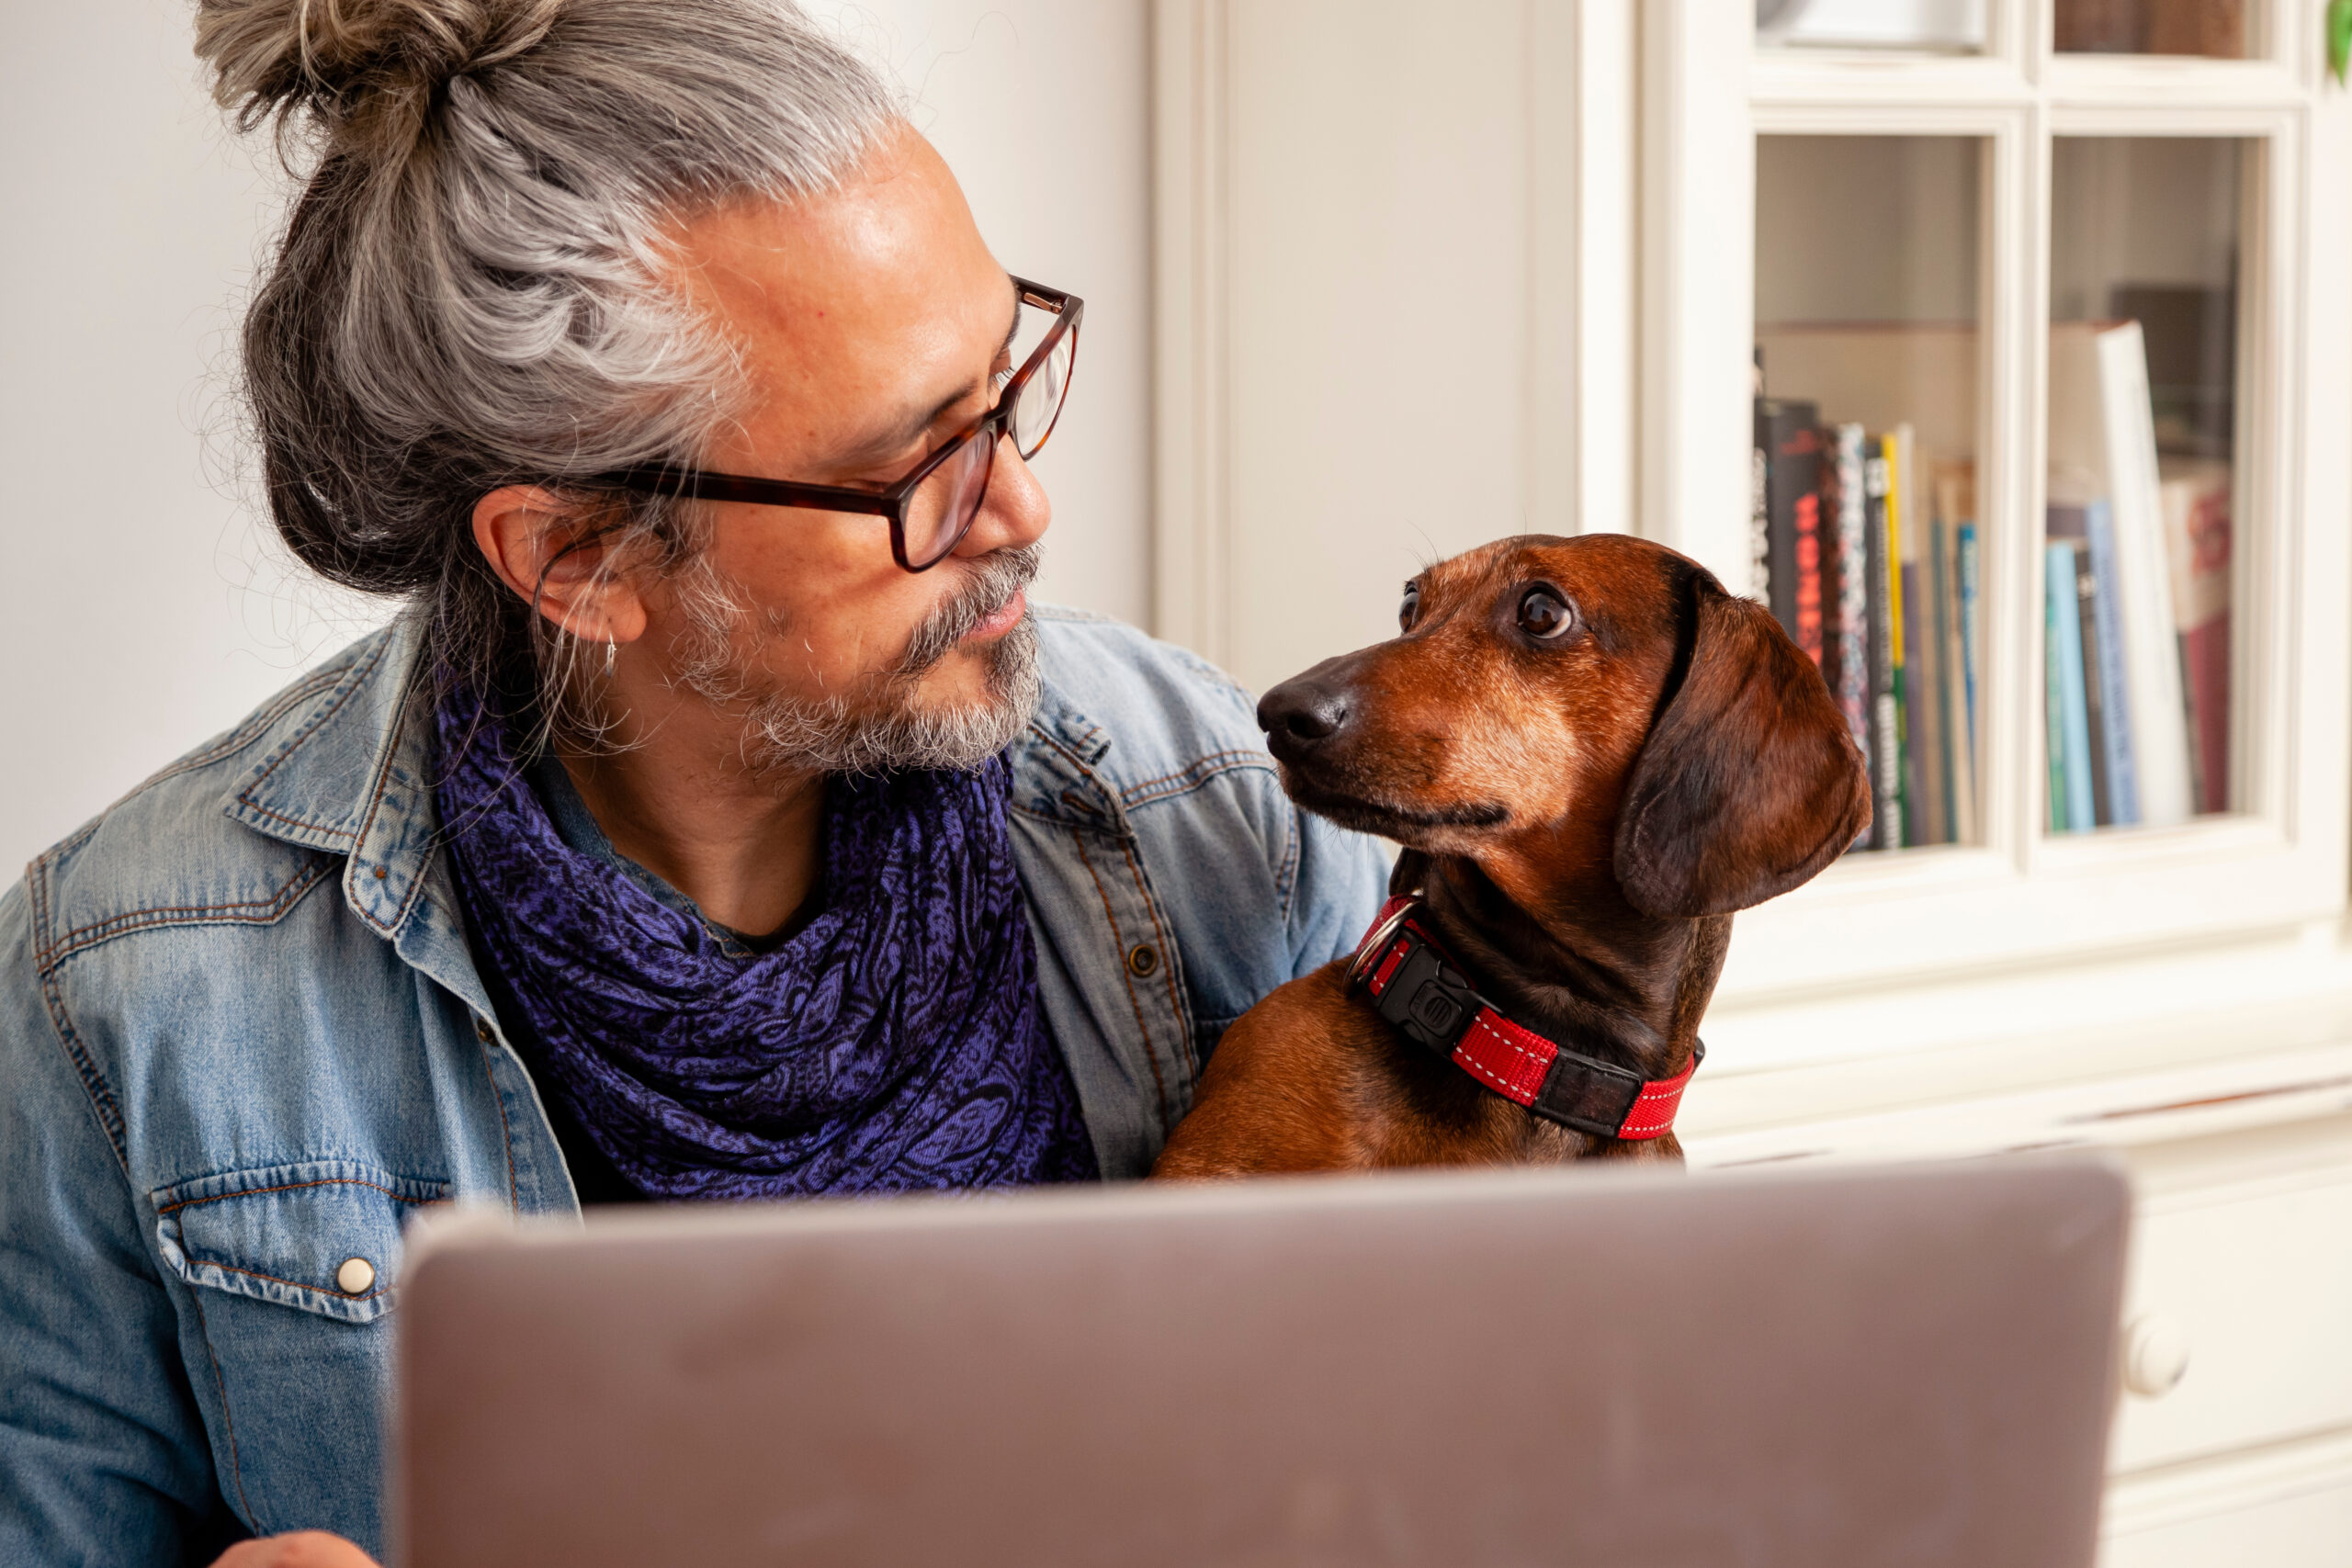 From detecting subtle changes in the environment to sensing emotions, here are five intriguing things your dog knows that you may not be aware of.